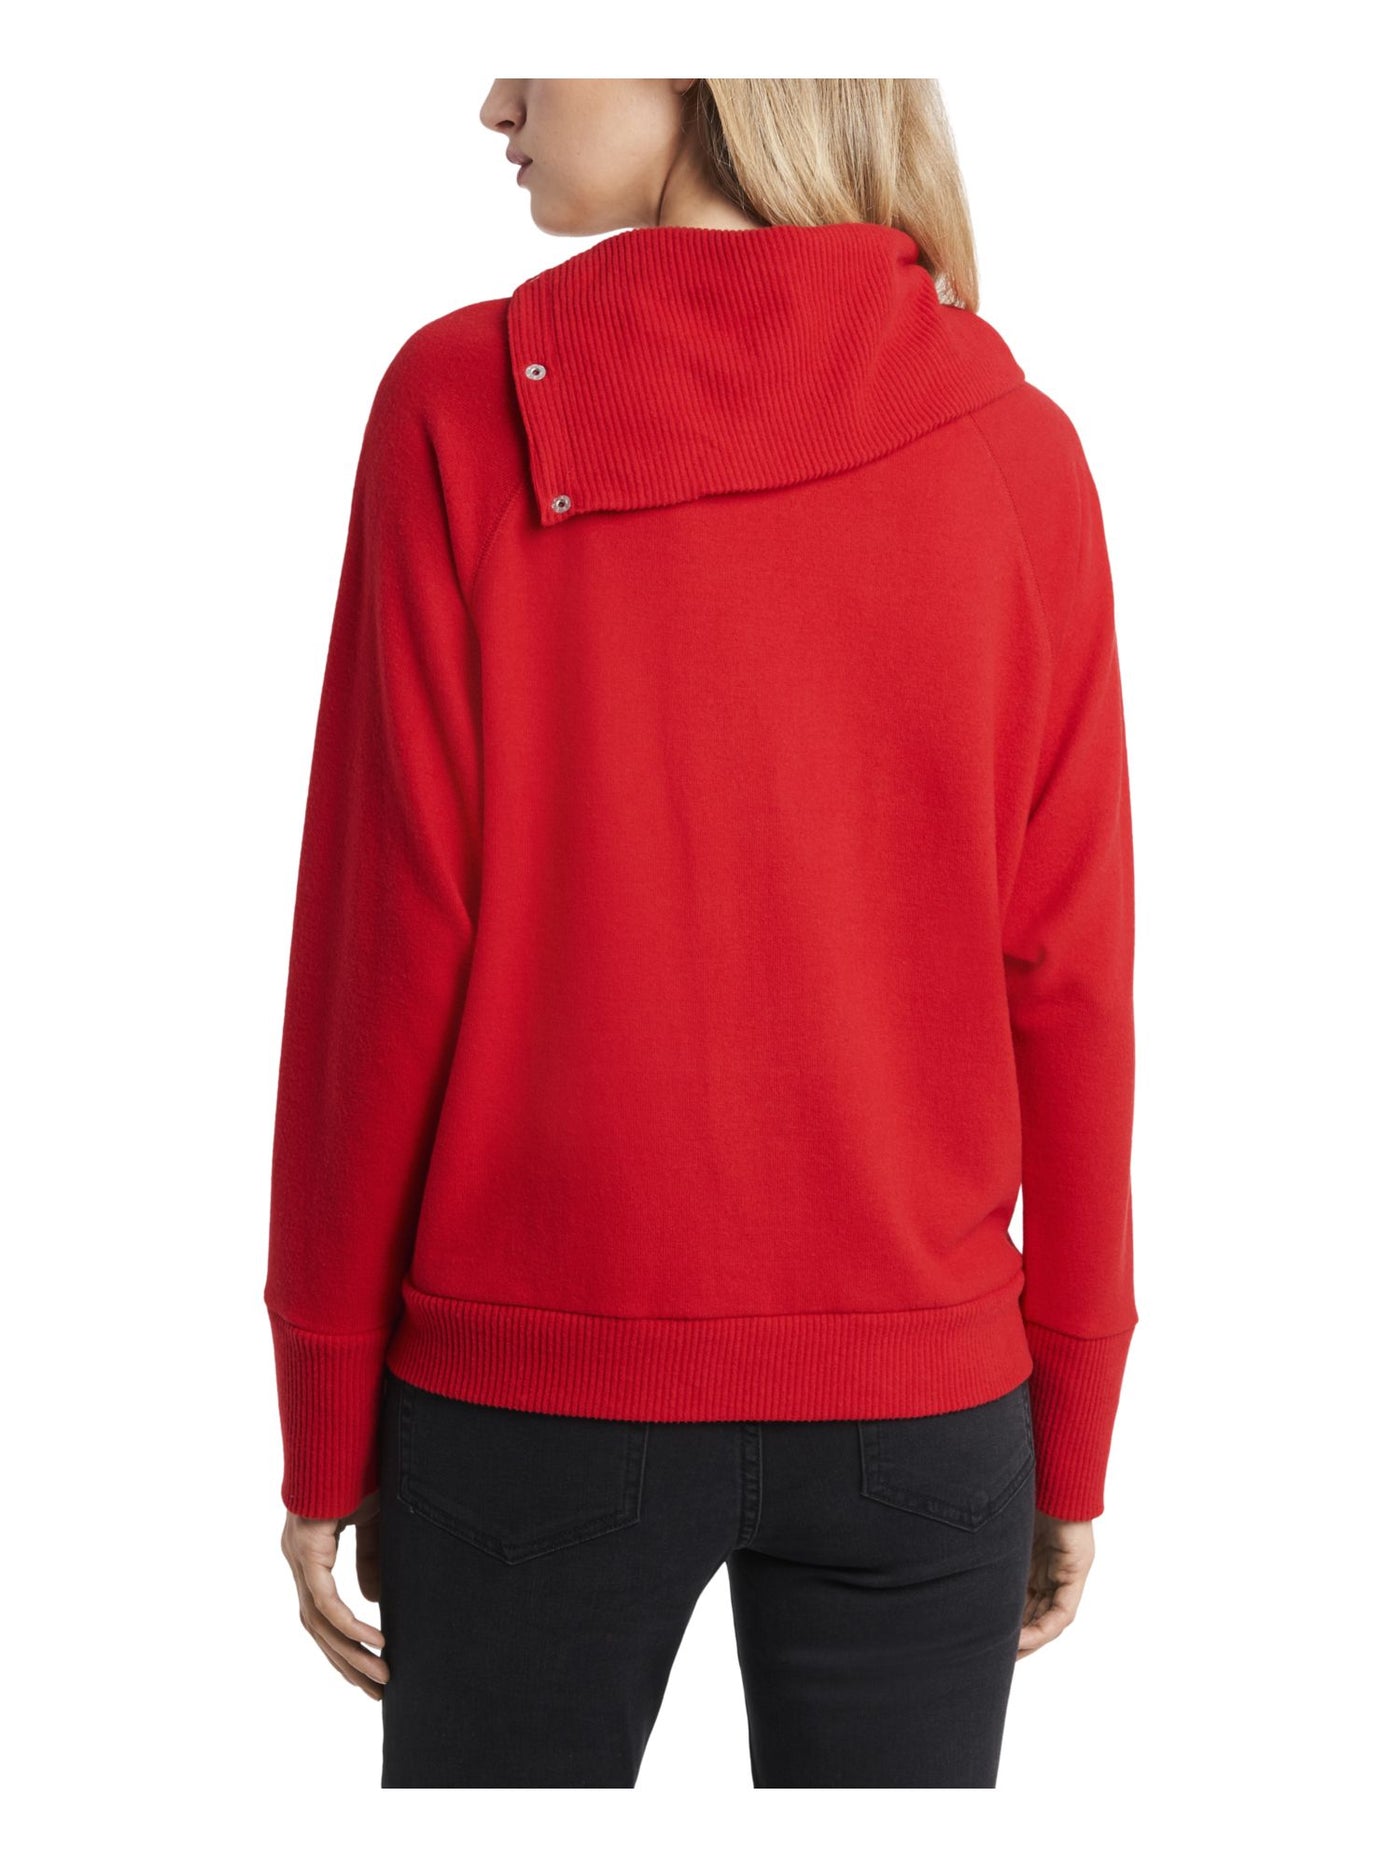 VINCE CAMUTO Womens Red Stretch Ribbed Fold Over Neck With Snaps Long Sleeve Sweater XS